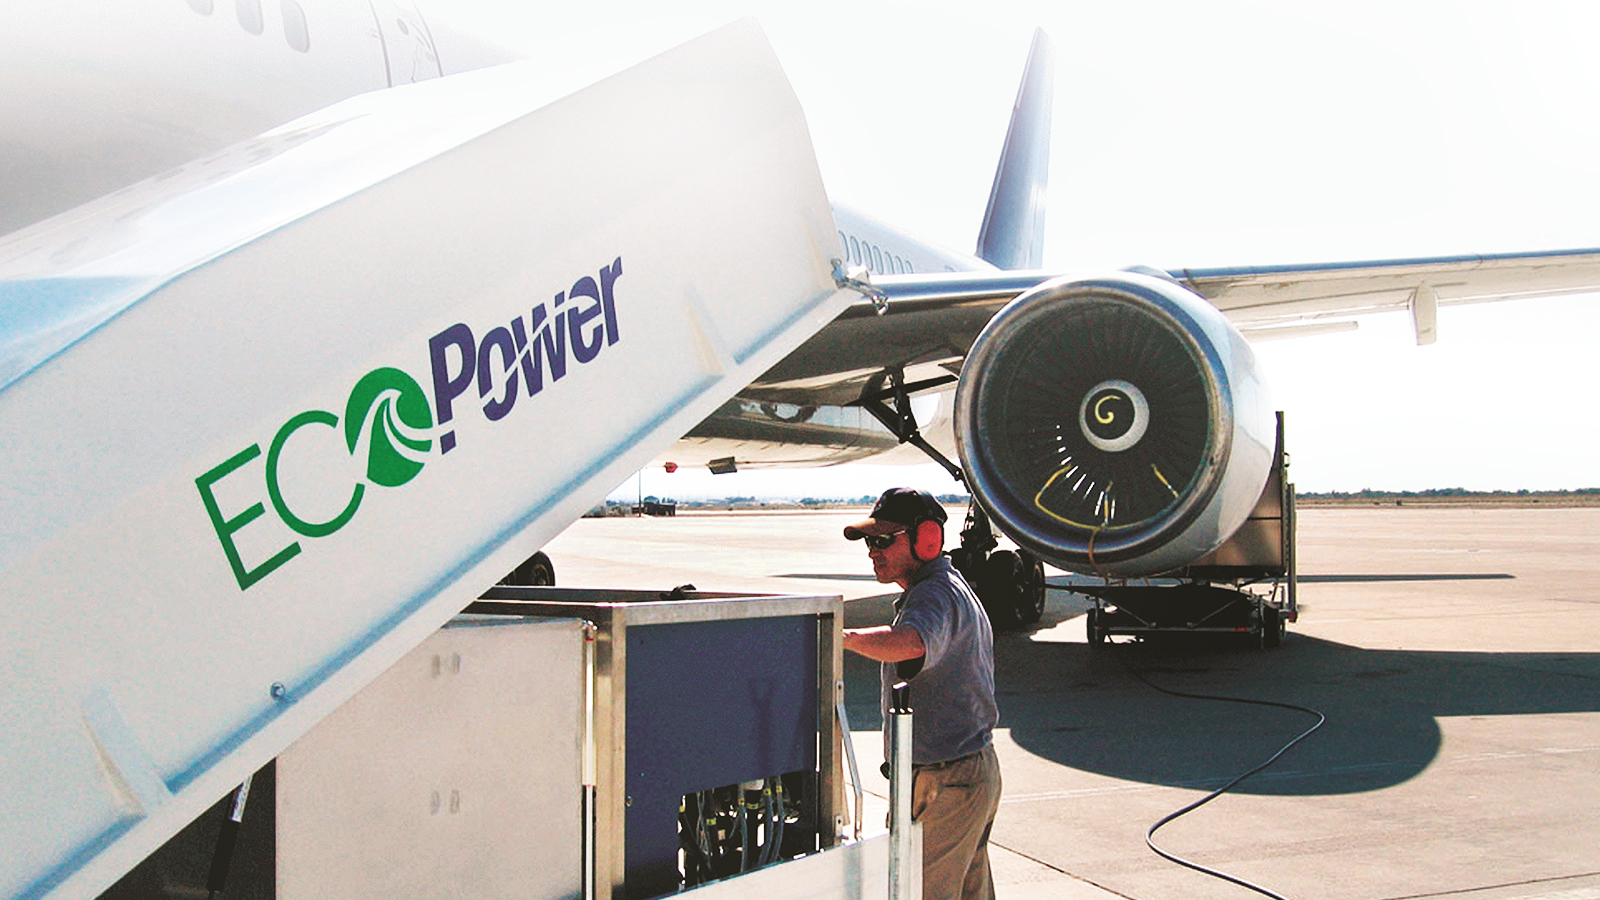 Keeping Aircraft Engines Fuel Efficient with EcoPower